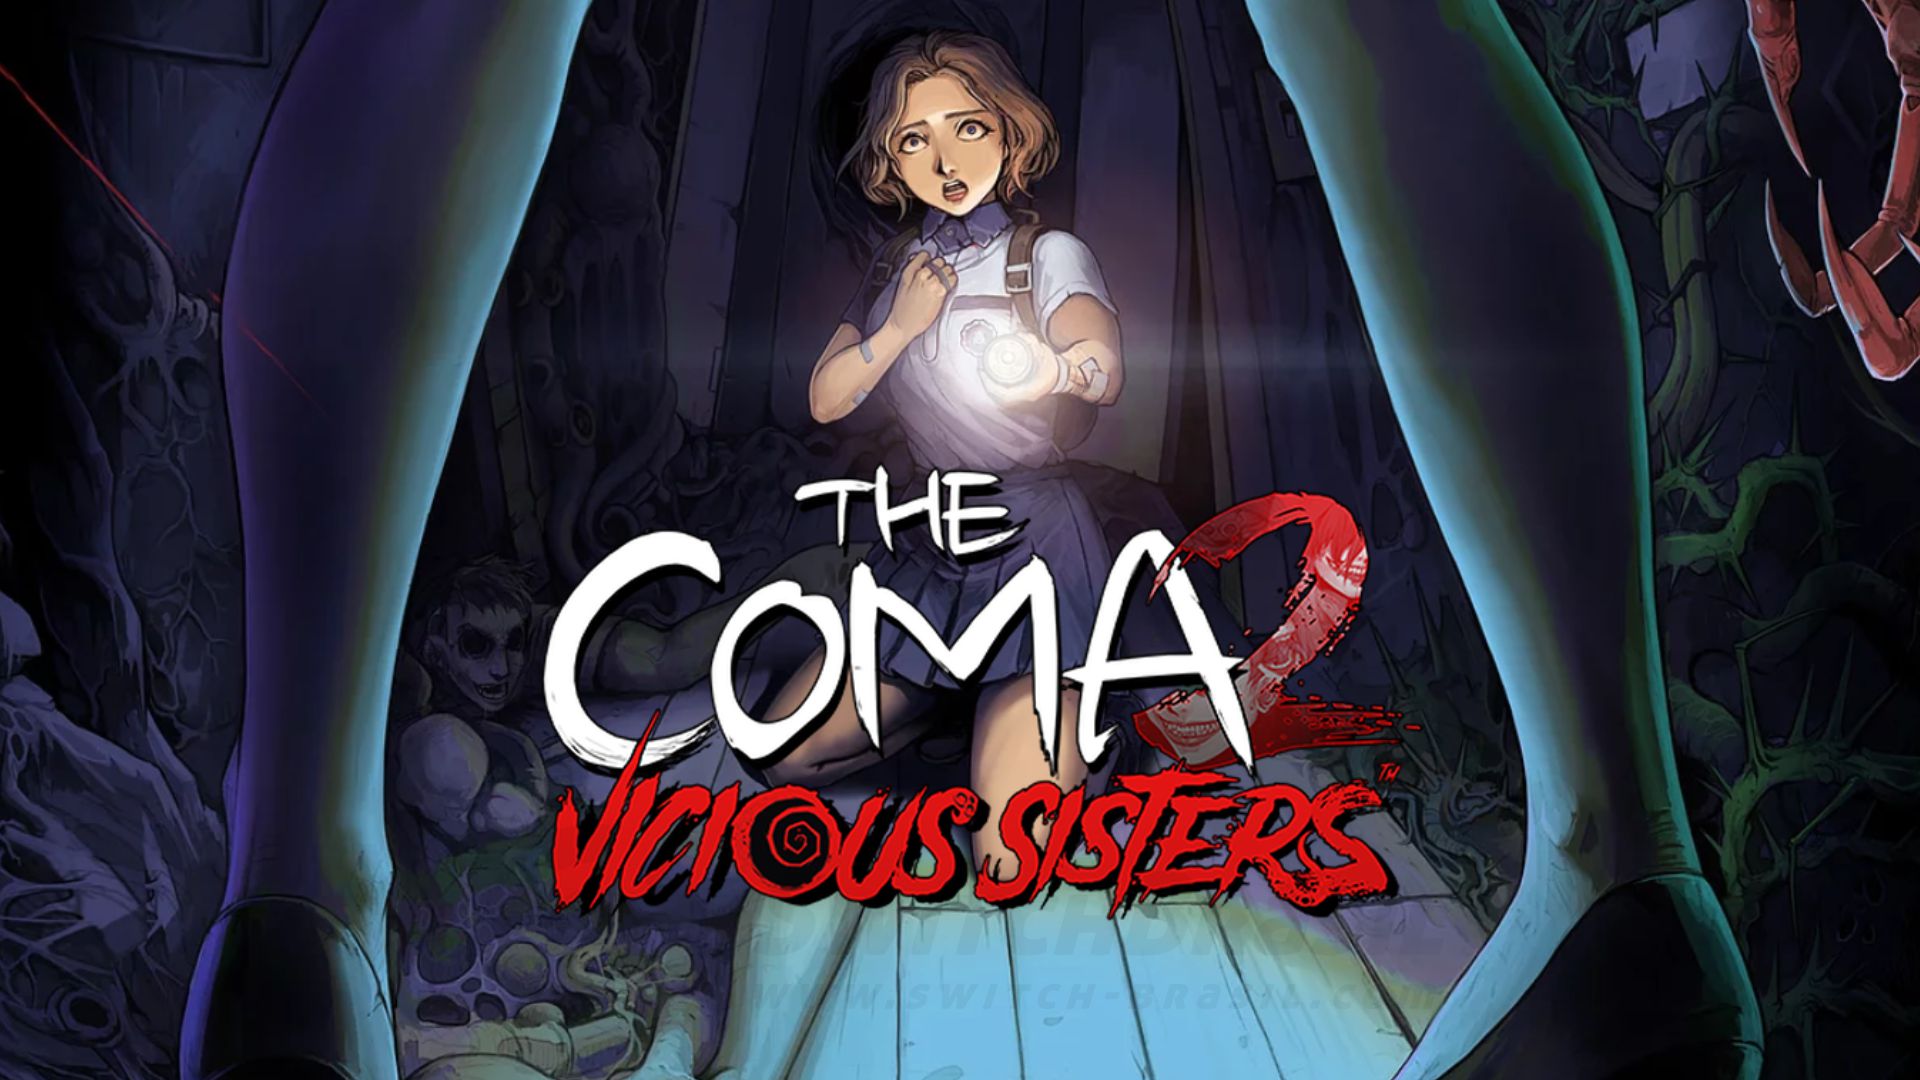 The Coma 2: Vicious Sisters Review